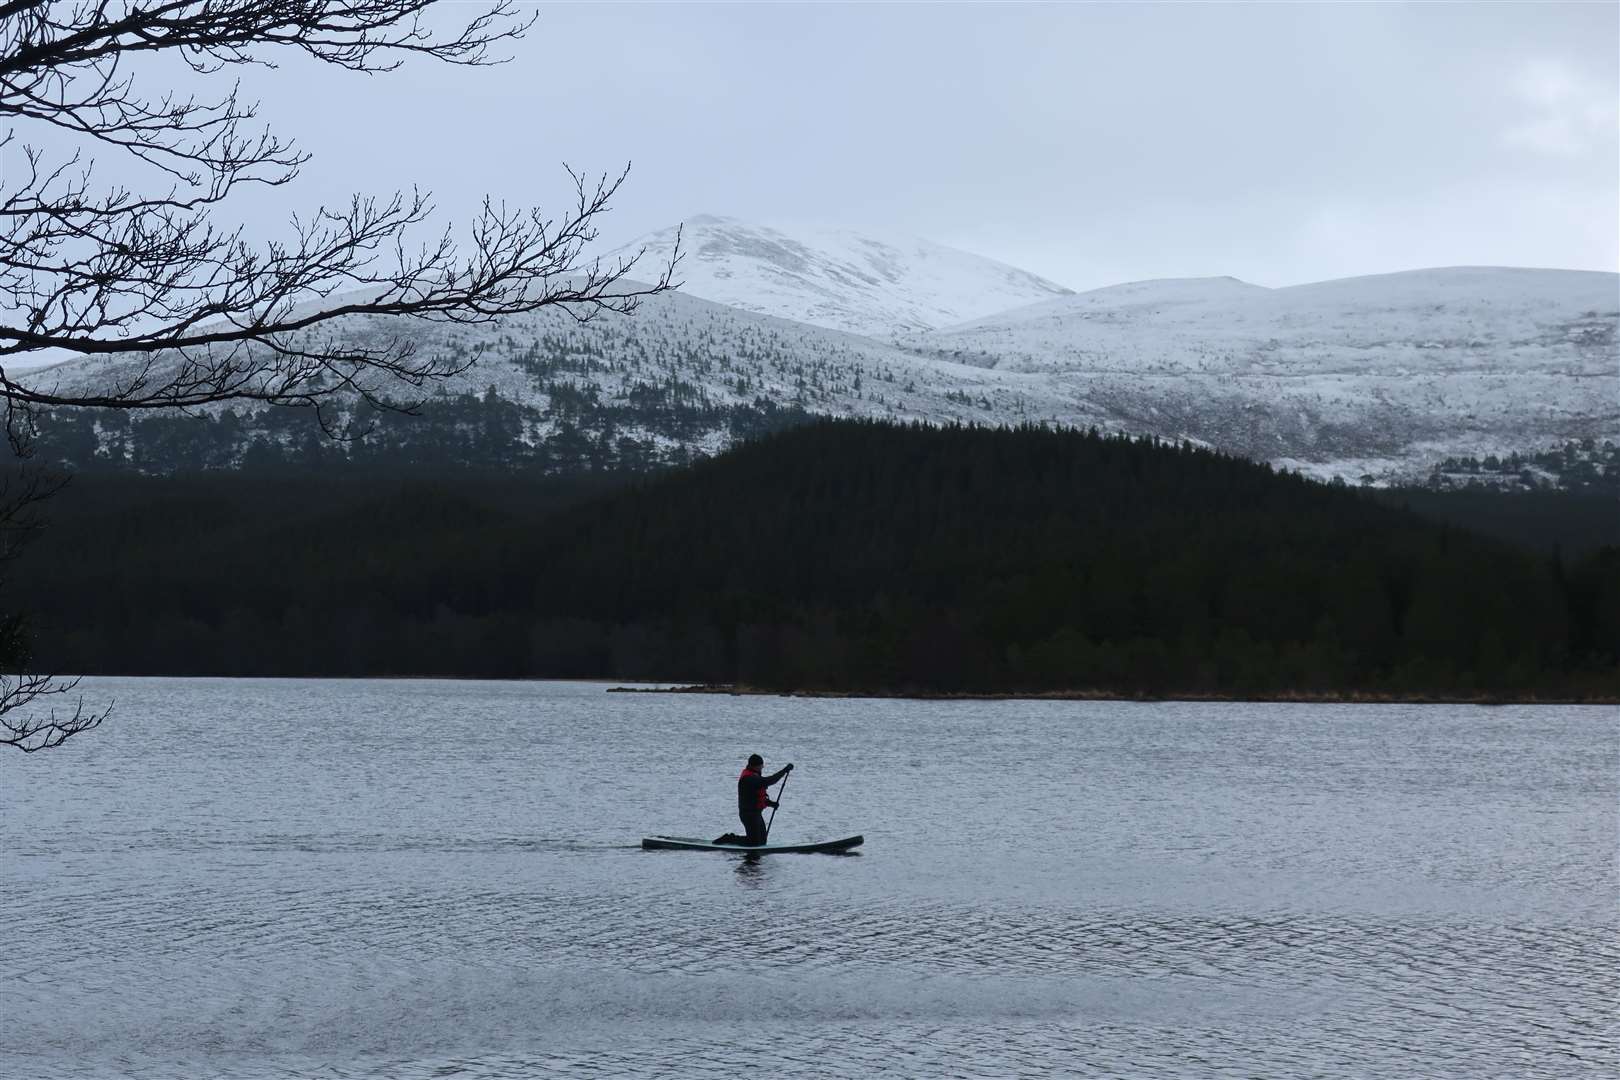 A paddleboarder glides across the loch.